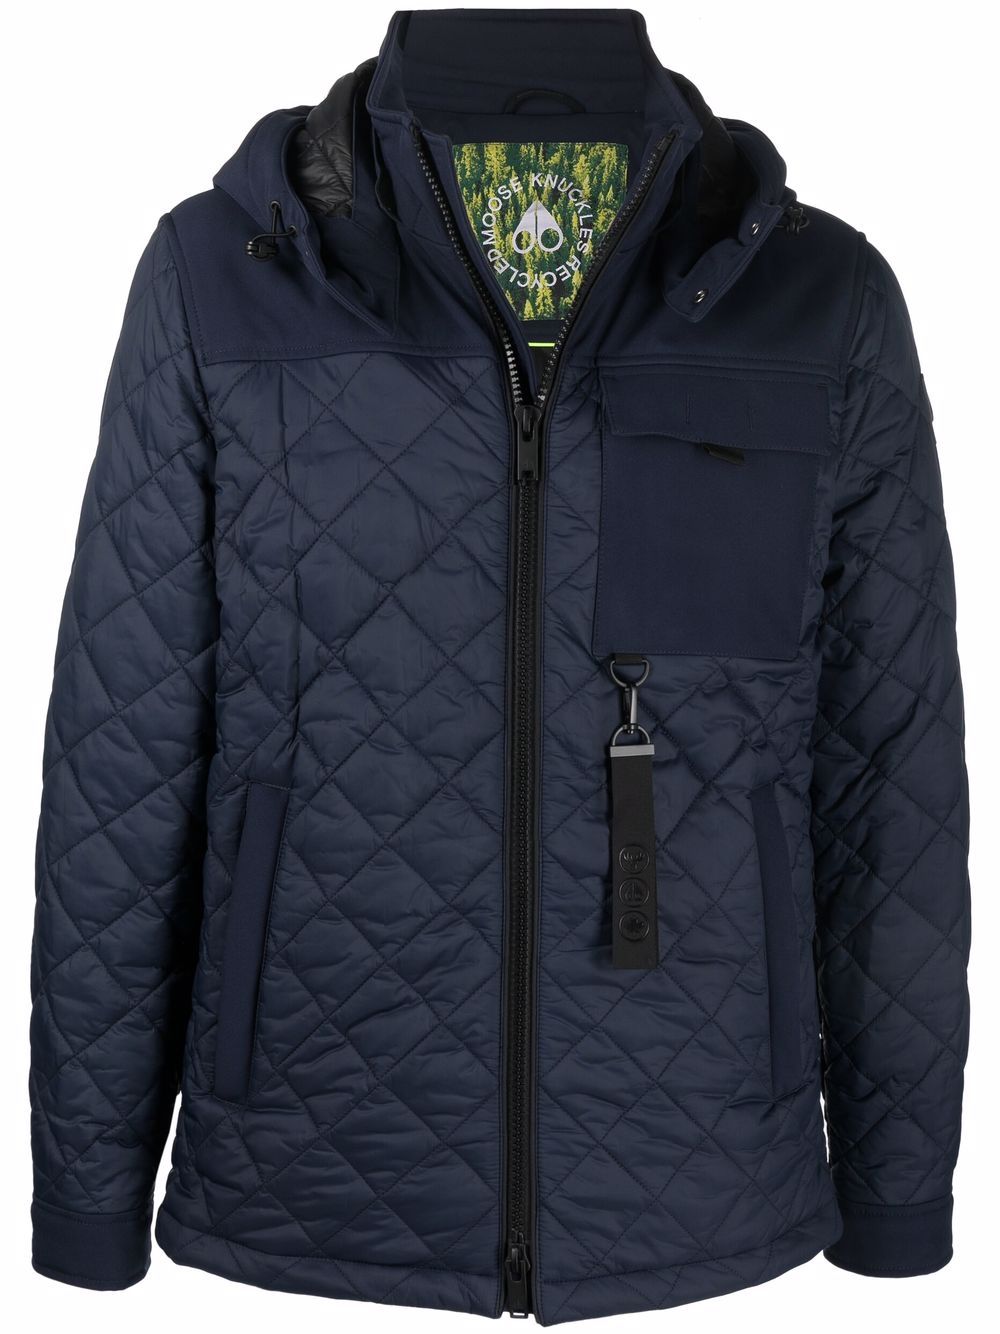 Out Bank Padded Jacket